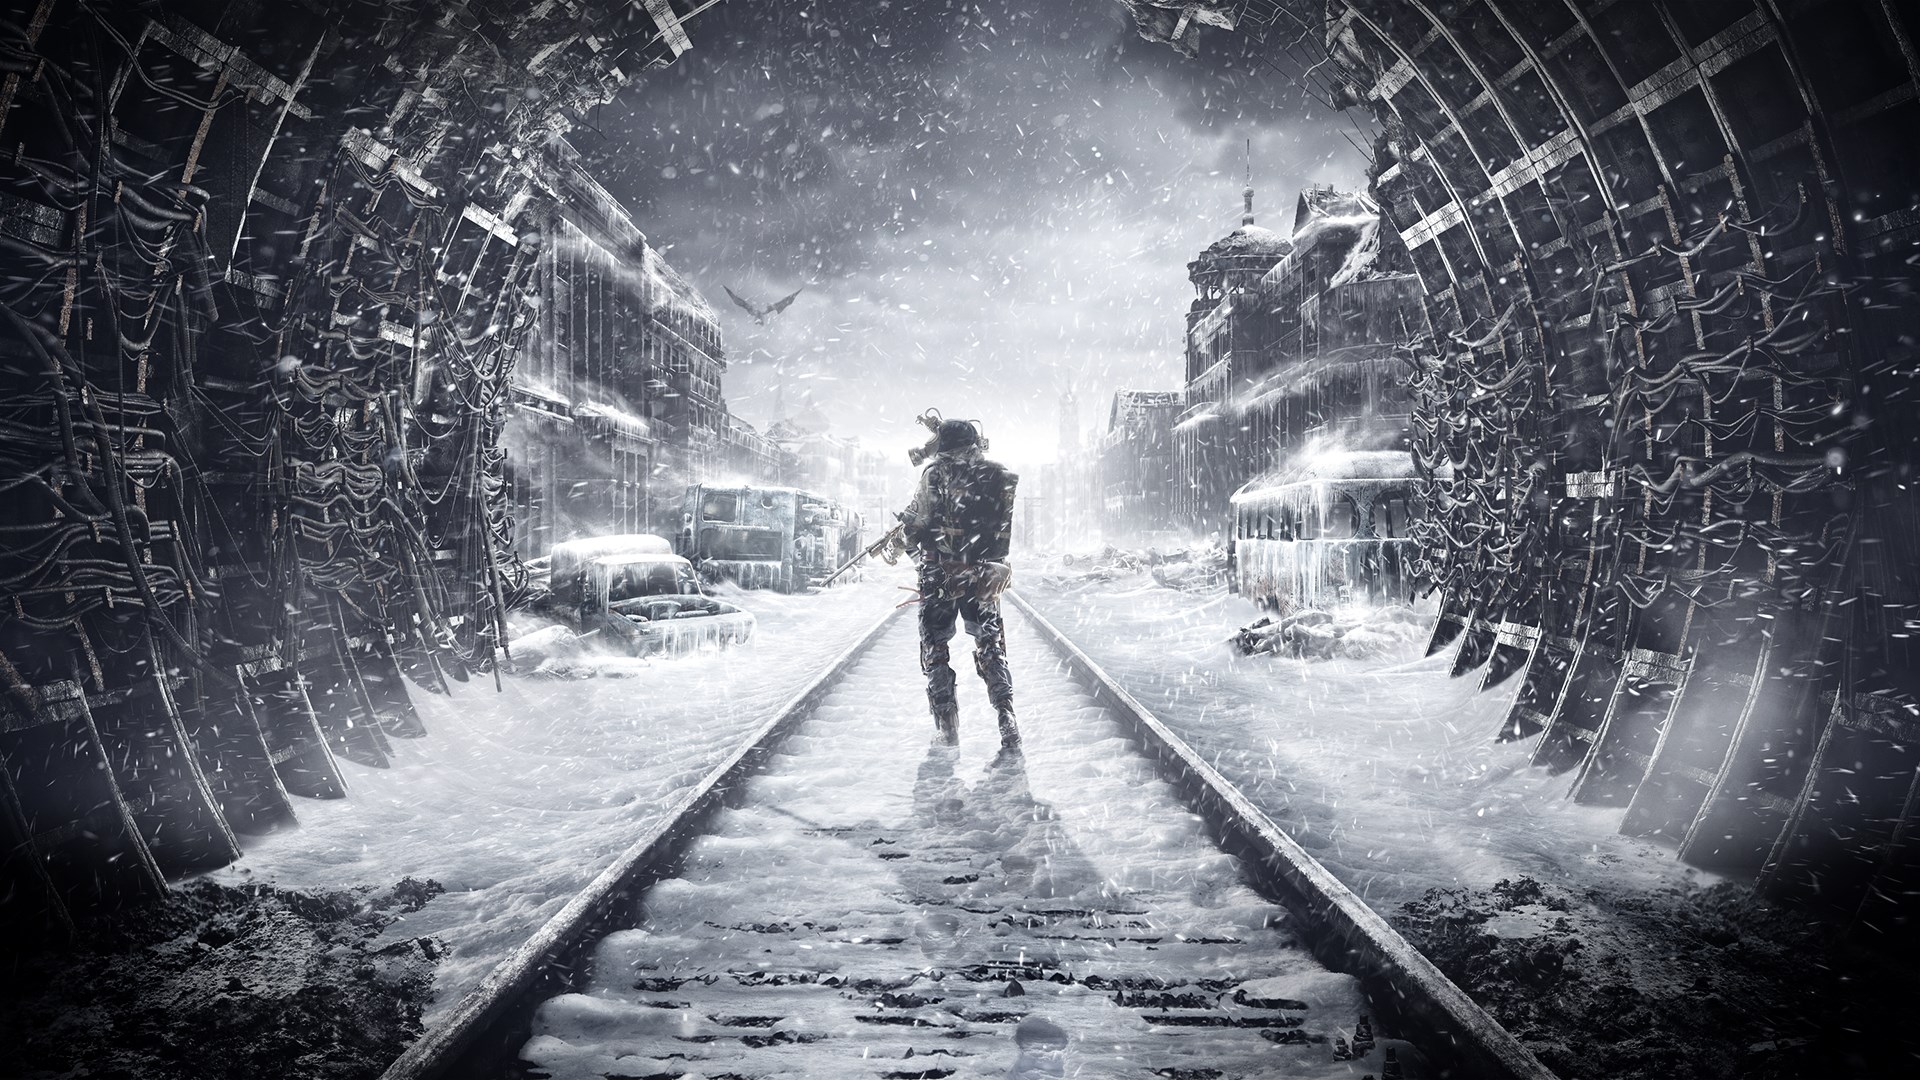 where can i buy metro exodus for pc